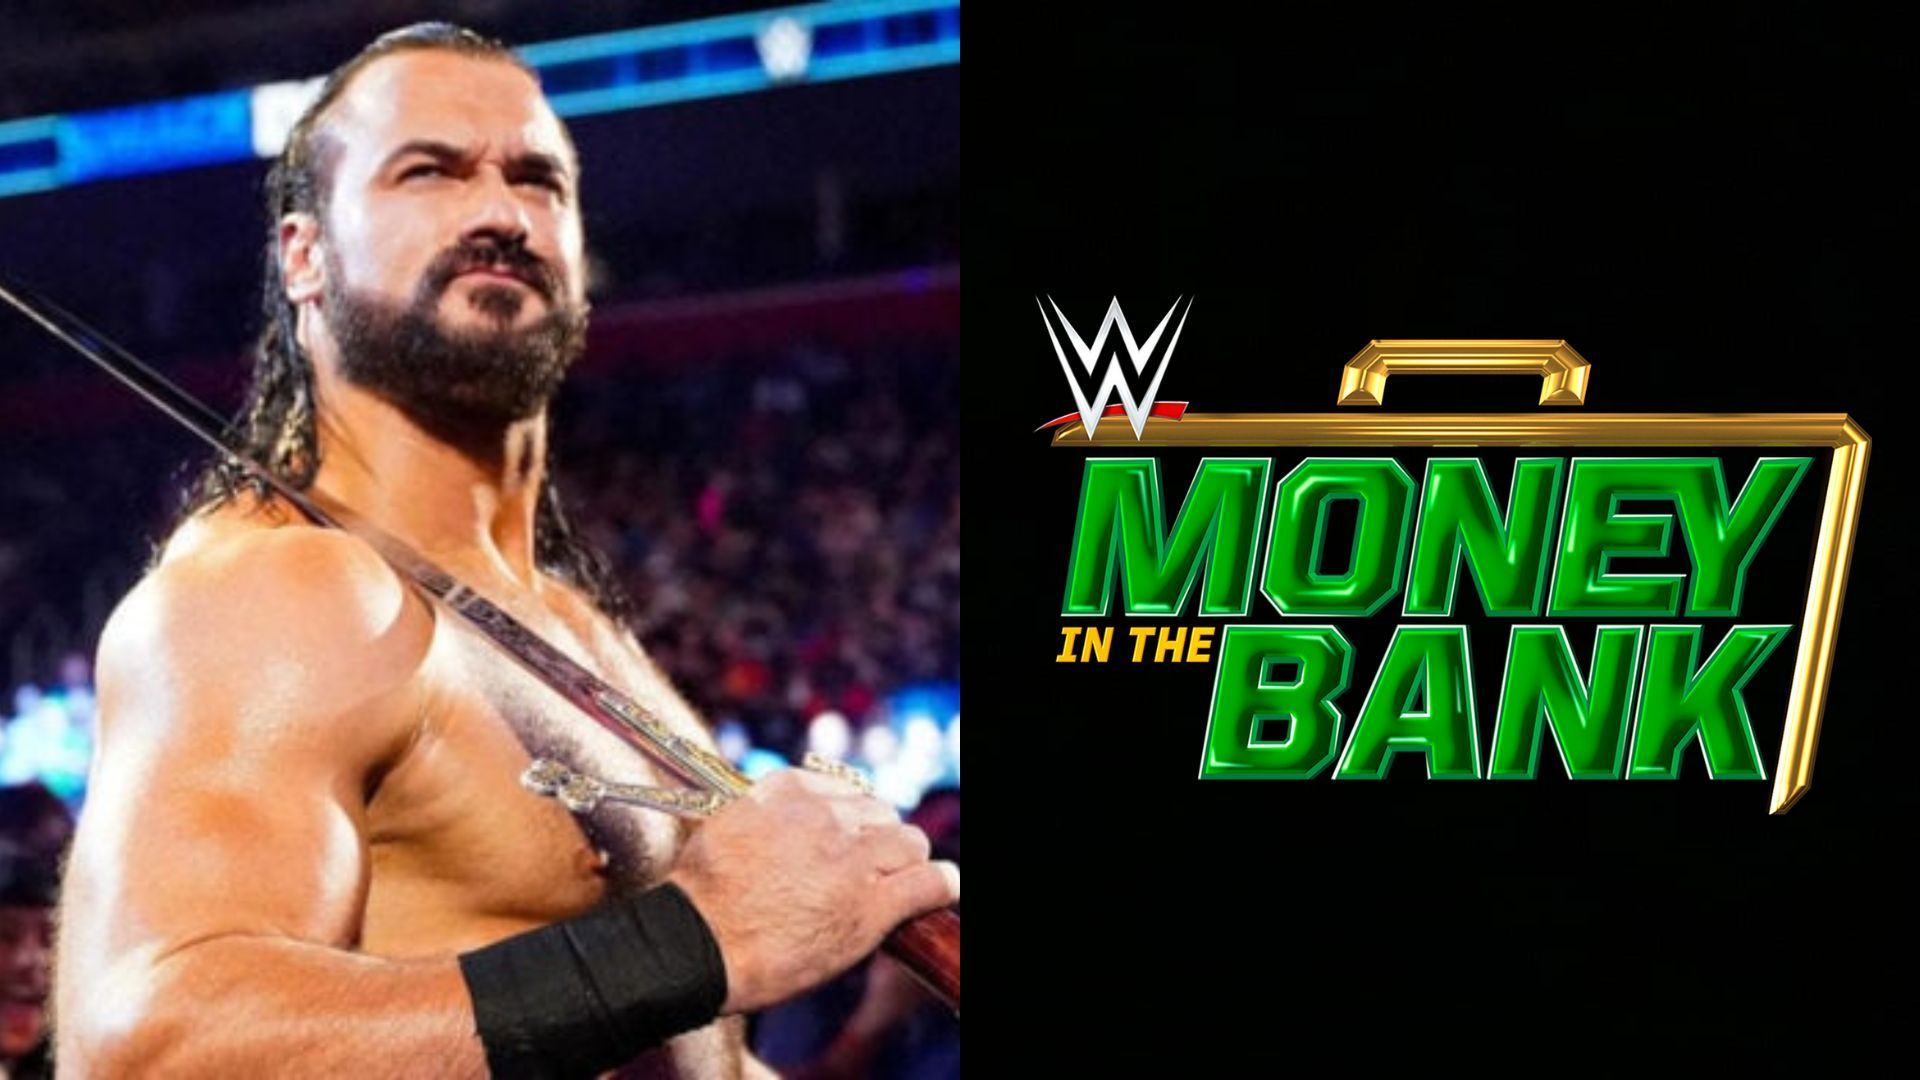 WWE Money in the Bank 2023 will transpire in London